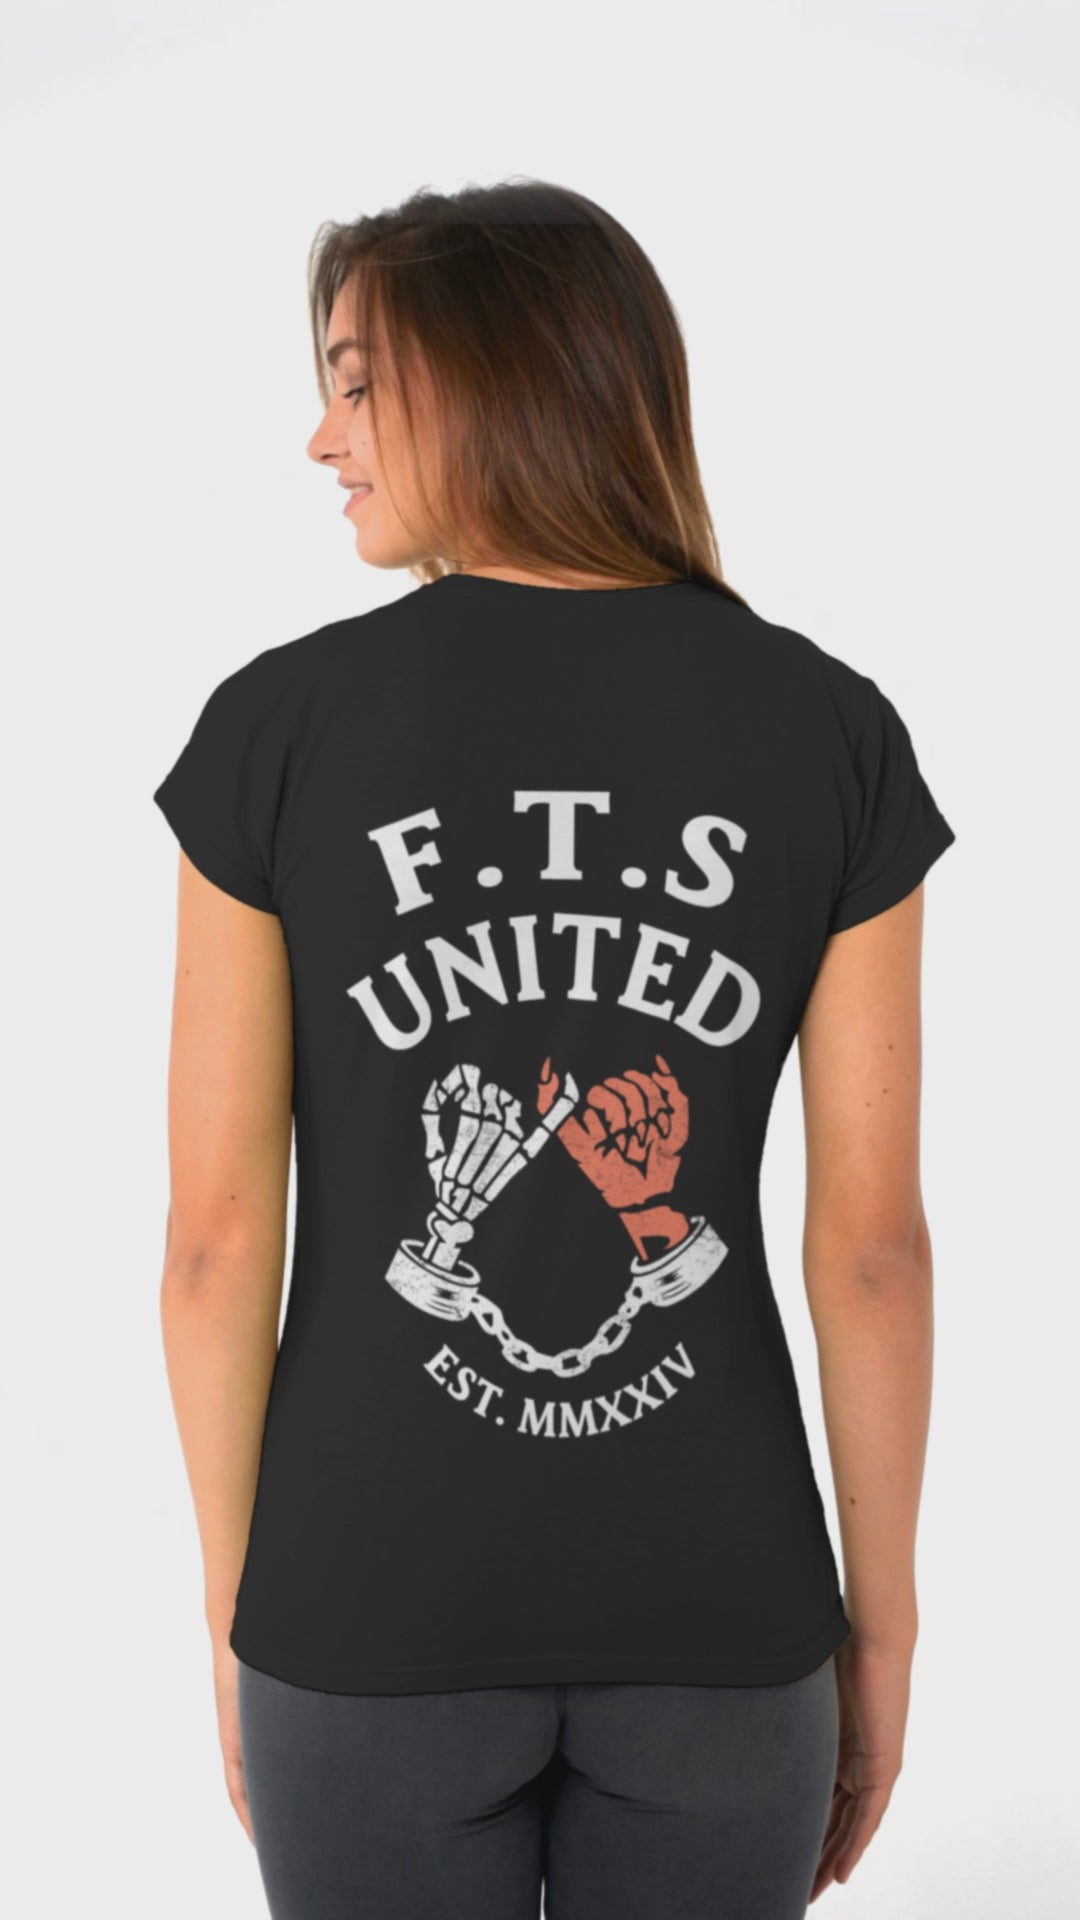 Black Tshirt with a skeleton hand and a devils hand doing a pinky promise. On the top is F.T.S United which stands for "Fuck this Shit United" established in Melbourne in 2024.